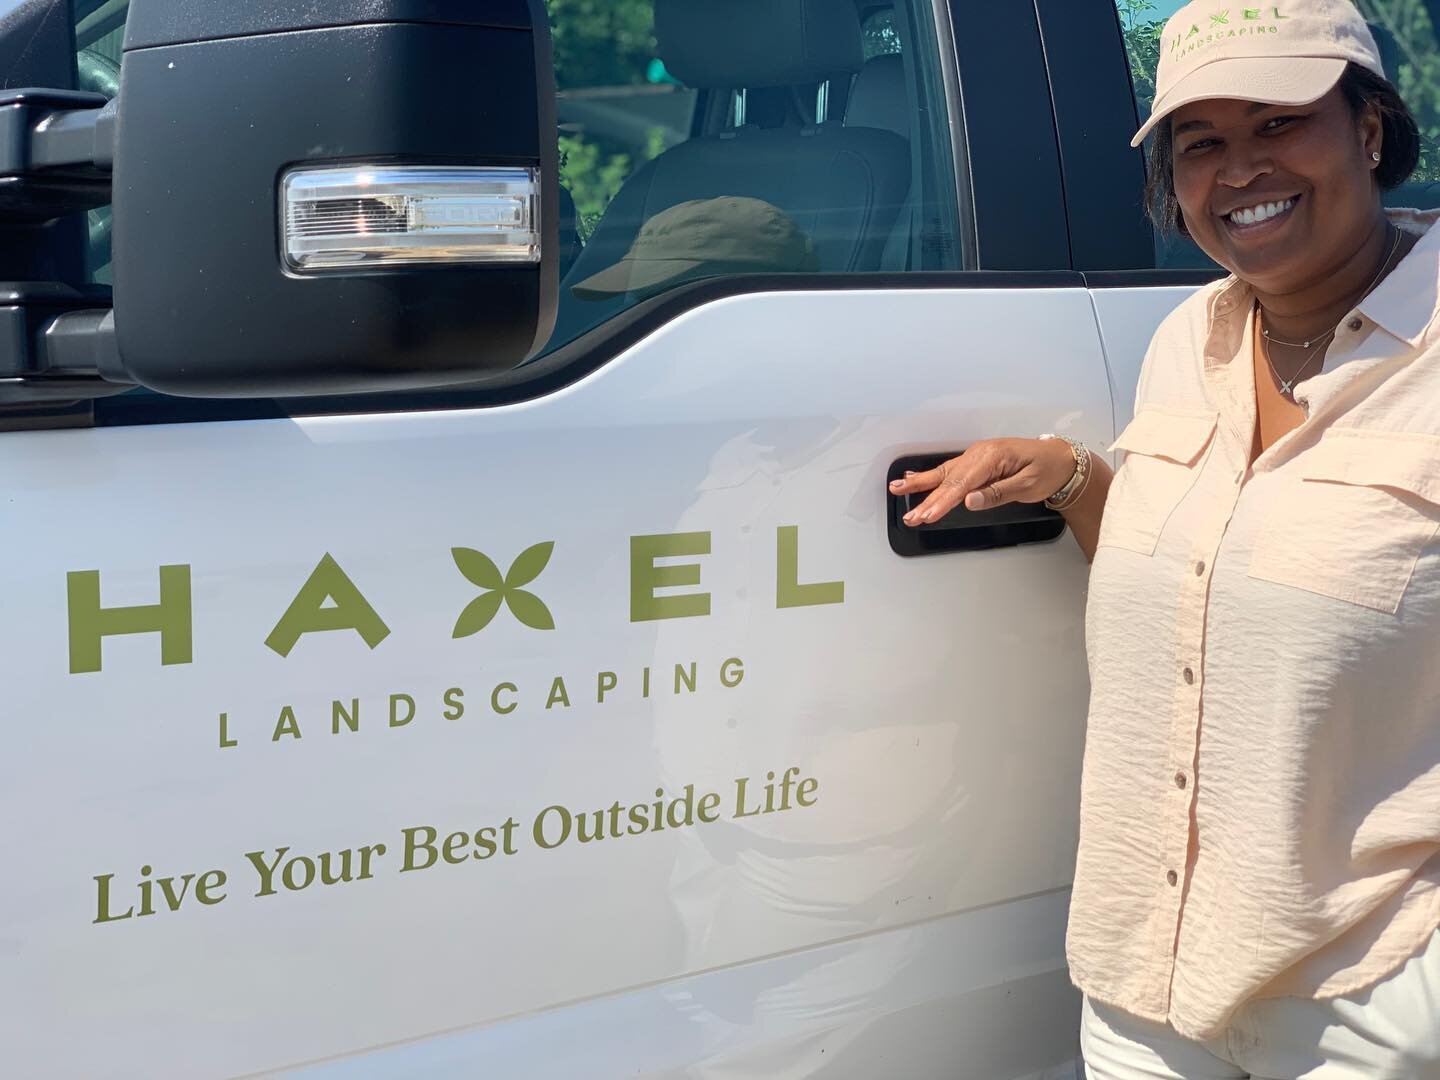 Be on the lookout for new HAXEL Landscaping trucks in your area!

When you&rsquo;re ready to live your best outside life, you know where to find us! 

 #Haxel #Haxellence #Landscaping #Houston #houstonlandscaping